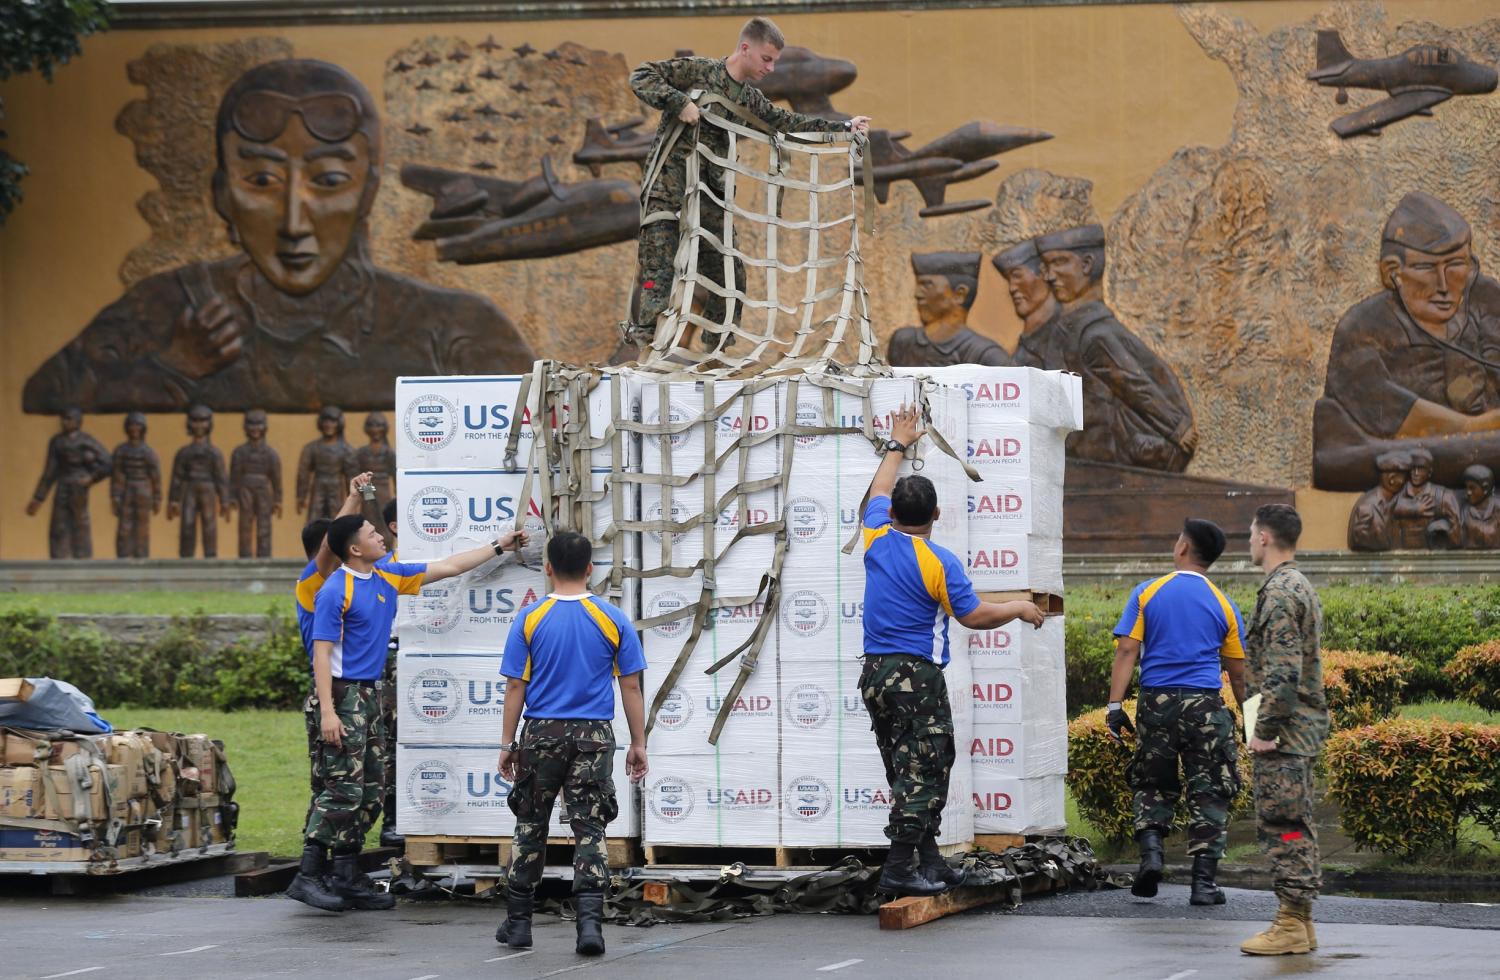 A U.S. Marine stands on top of boxes containing tent material from U.S. relief organisation USAid, as he and Philippine soldiers prepare the load to be deployed by airlift by U.S. military to victims of super typhoon Haiyan, at Manila airport November 13, 2013. Philippine officials have been overwhelmed by Haiyan, one of the strongest typhoons on record, which tore through the central Philippines on Friday and flattened Tacloban, coastal capital of Leyte province where officials had feared 10,000 people died, many drowning in a tsunami-like wall of seawater. REUTERS/Wolfgang Rattay (PHILIPPINES - Tags: DISASTER ENVIRONMENT MILITARY) - GM1E9BD0WA102